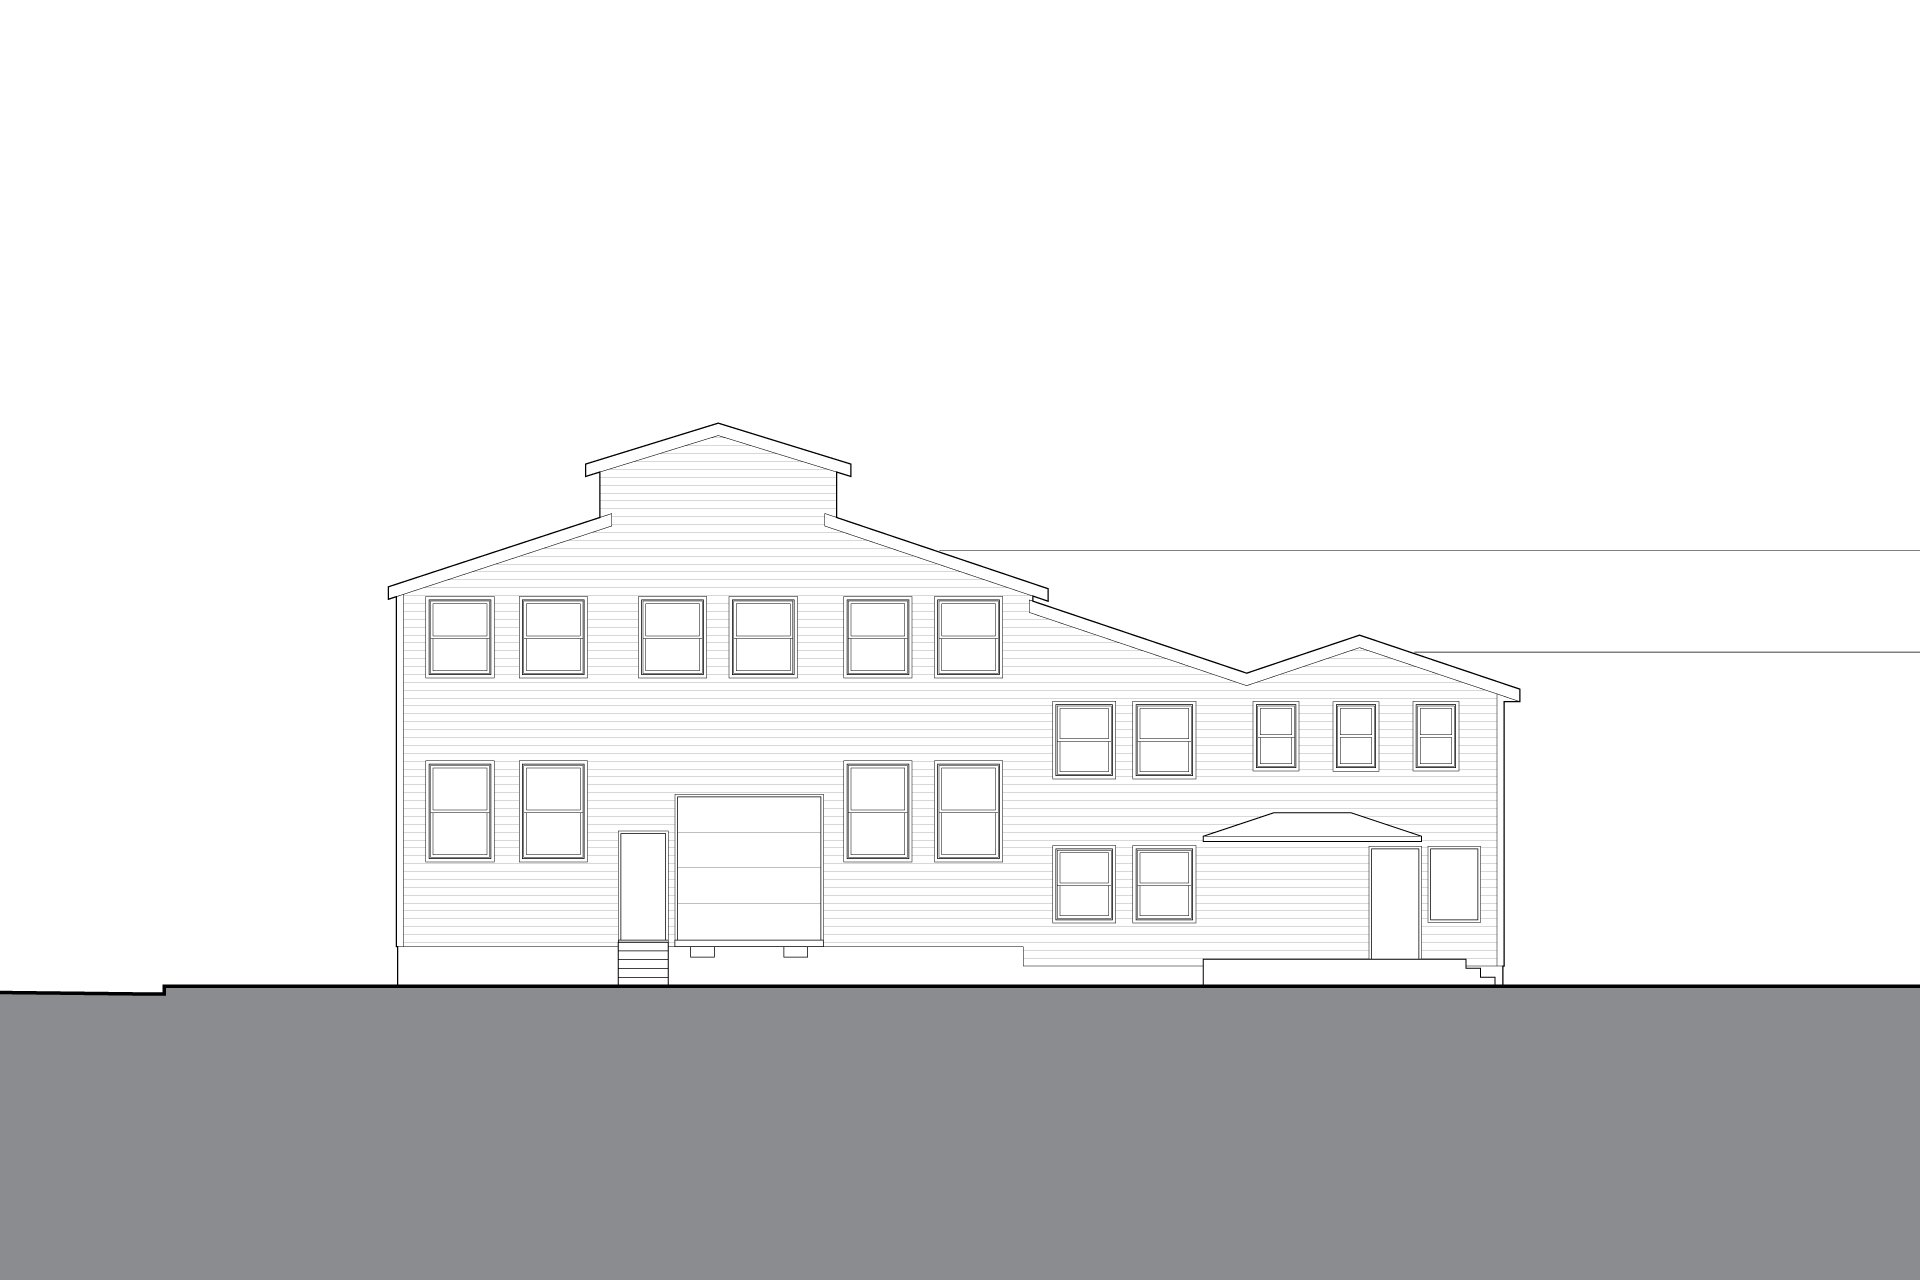 This is a drawing of the east elevation of the Warehouse Rehab before renovations.